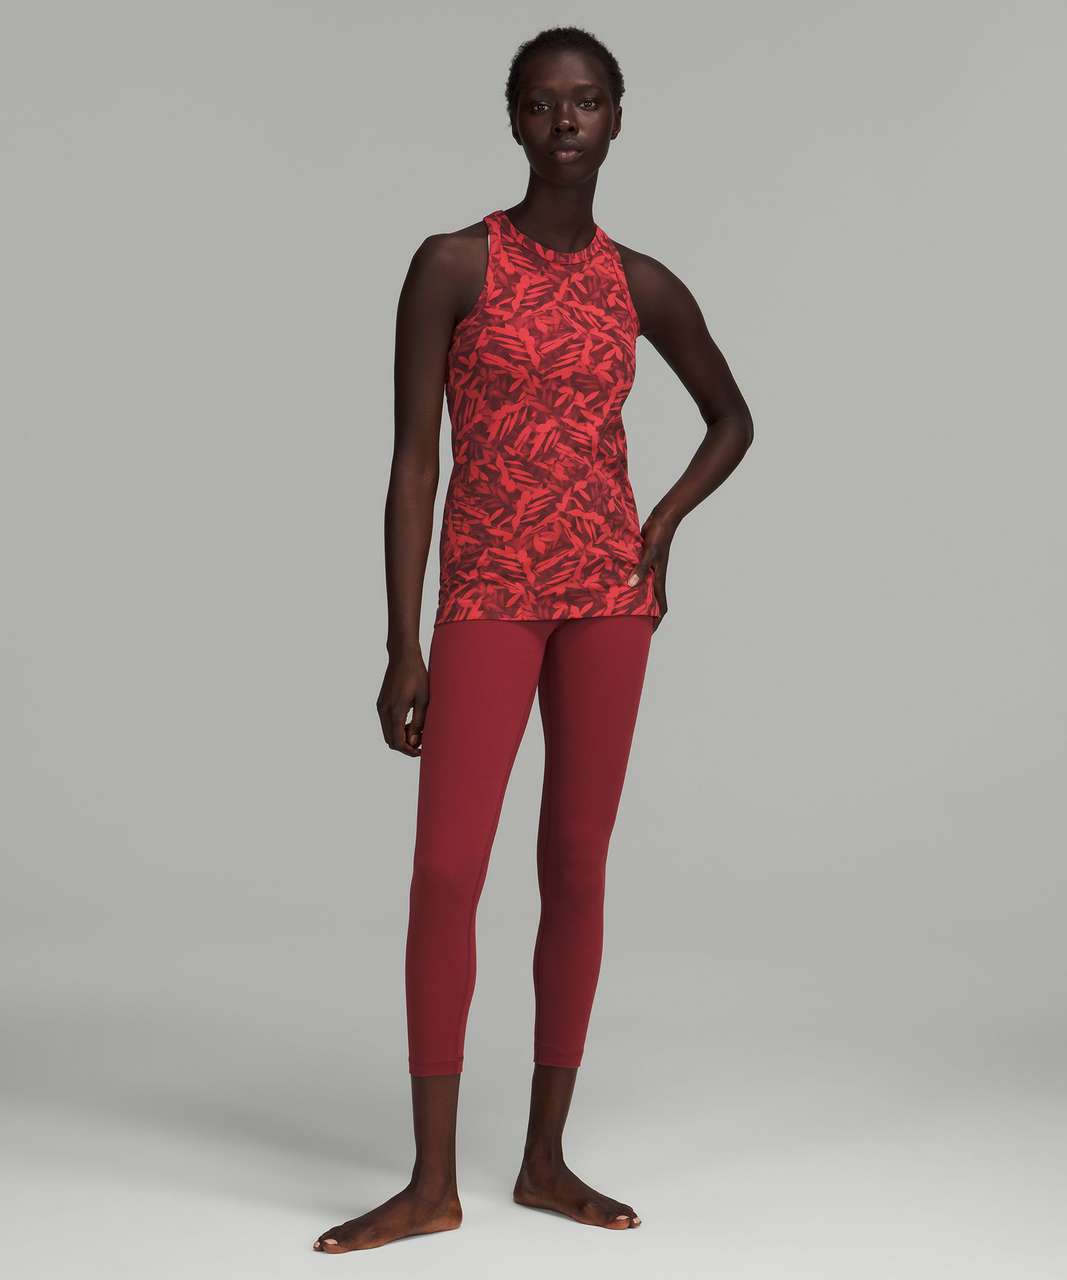 WOOTD Align cropped tank (size 8) in Spray Leaf Fireside Red and